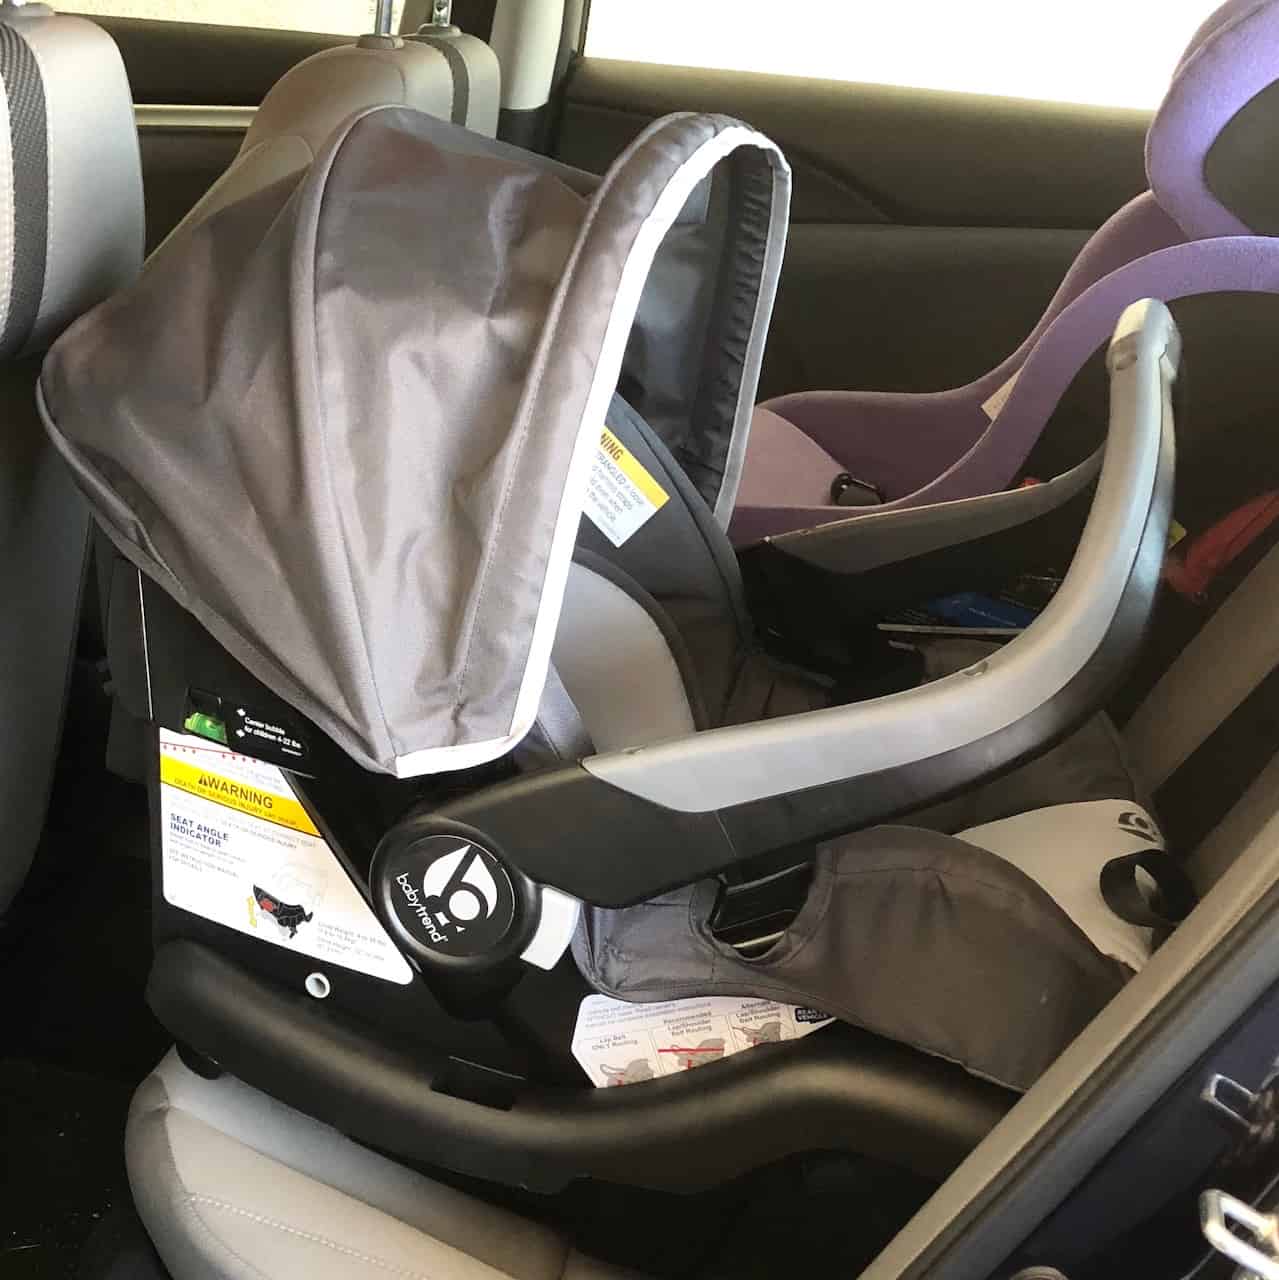 Baby Trend Car Seat Reviews Free Available - Is Baby Trend Car Seat Good